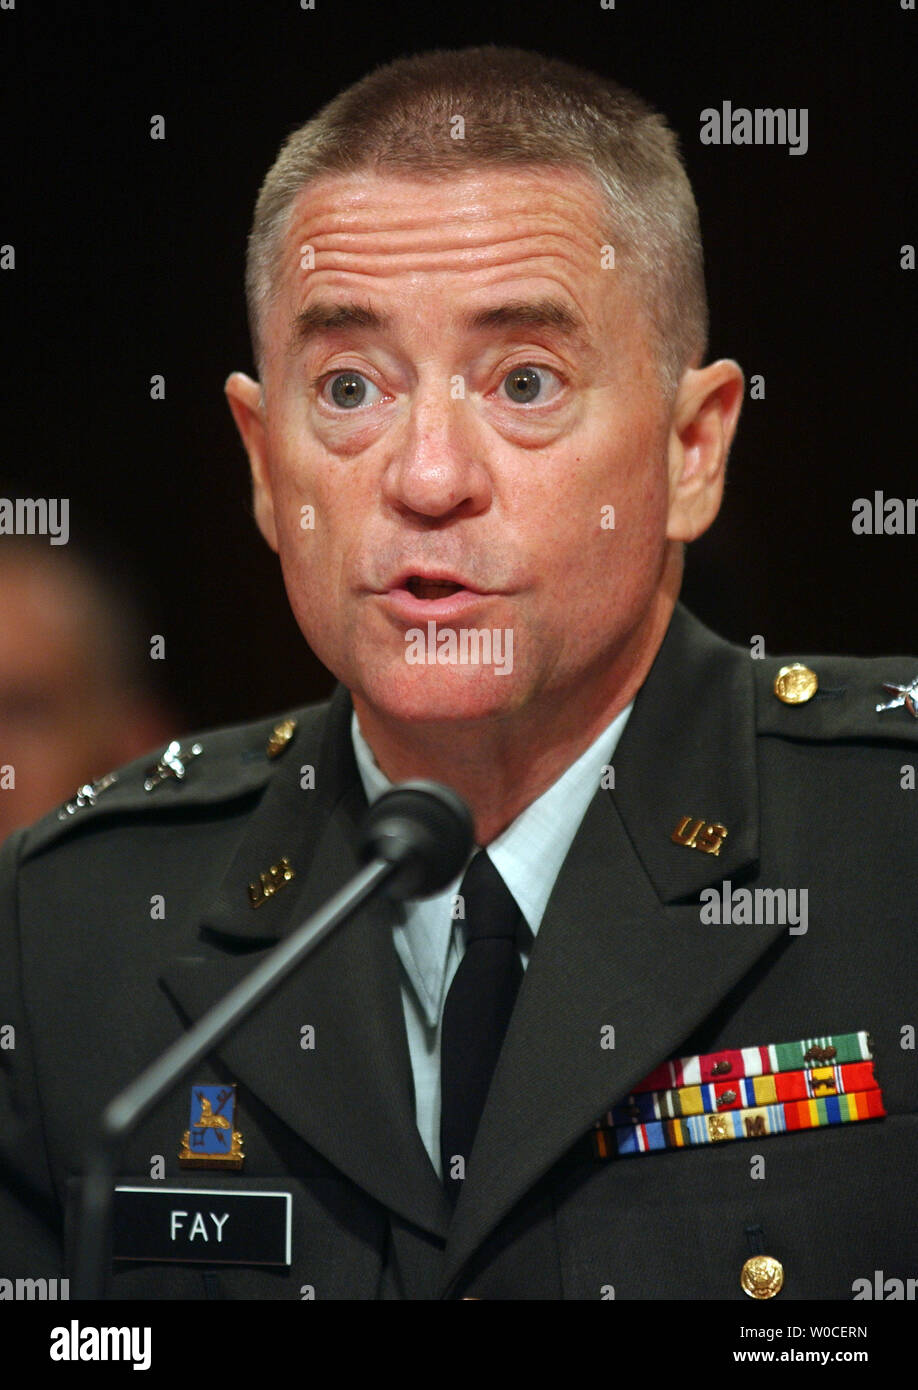 Maj. Gen. George Fay testifies before the Senate Armed Service Committee regarding the abuses of the 205th Military Intelligence Brigade at Abu Ghraib Prison, Iraq.  He said that mistakes were made because of a shortage of soldiers and general chaos.   (UPI Photo/Michael Kleinfeld) Stock Photo